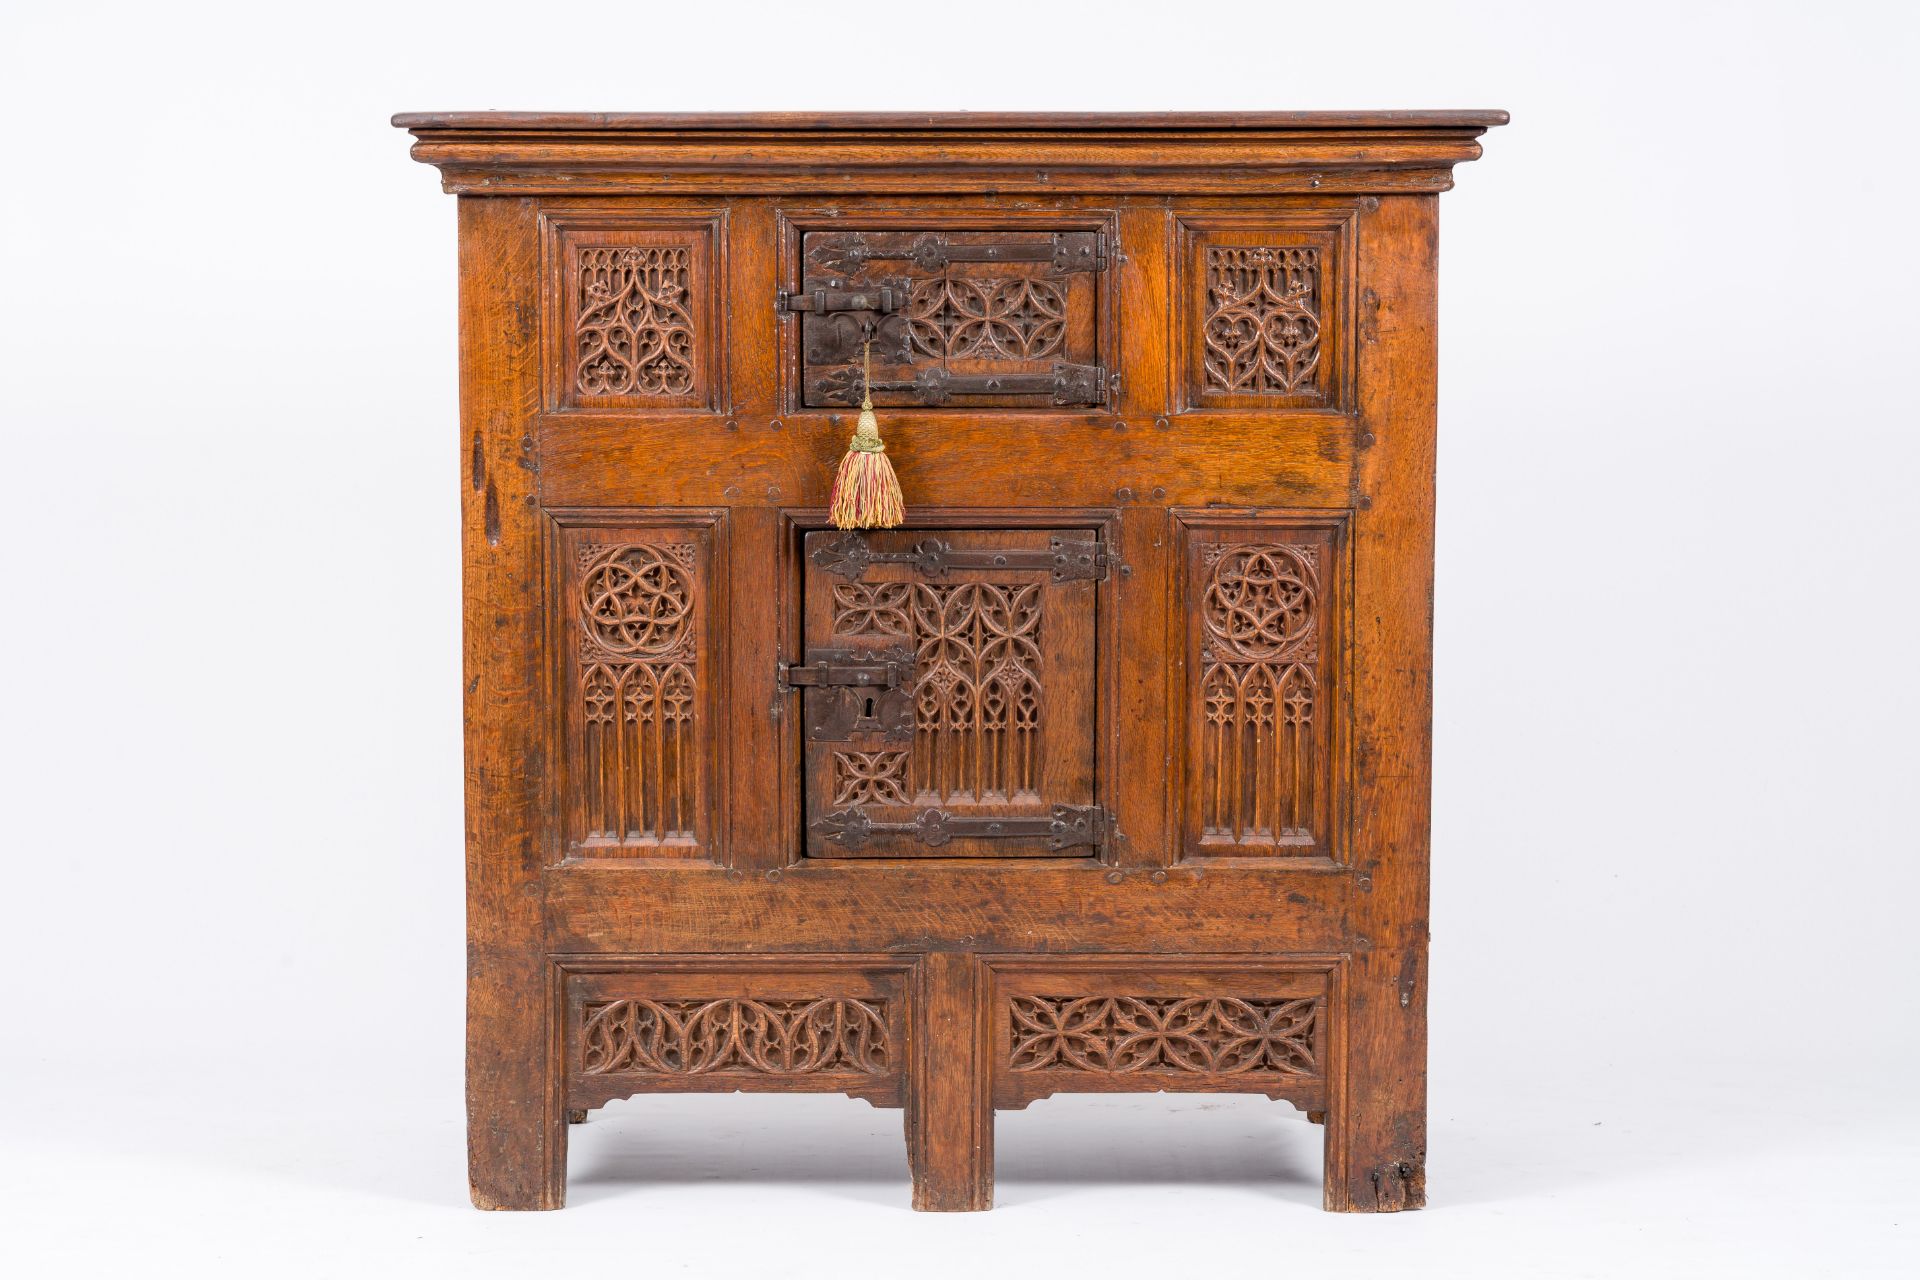 An exceptional Gothic wood two-door cupboard with linenfold and tracery panels, early 16th C. - Image 3 of 6